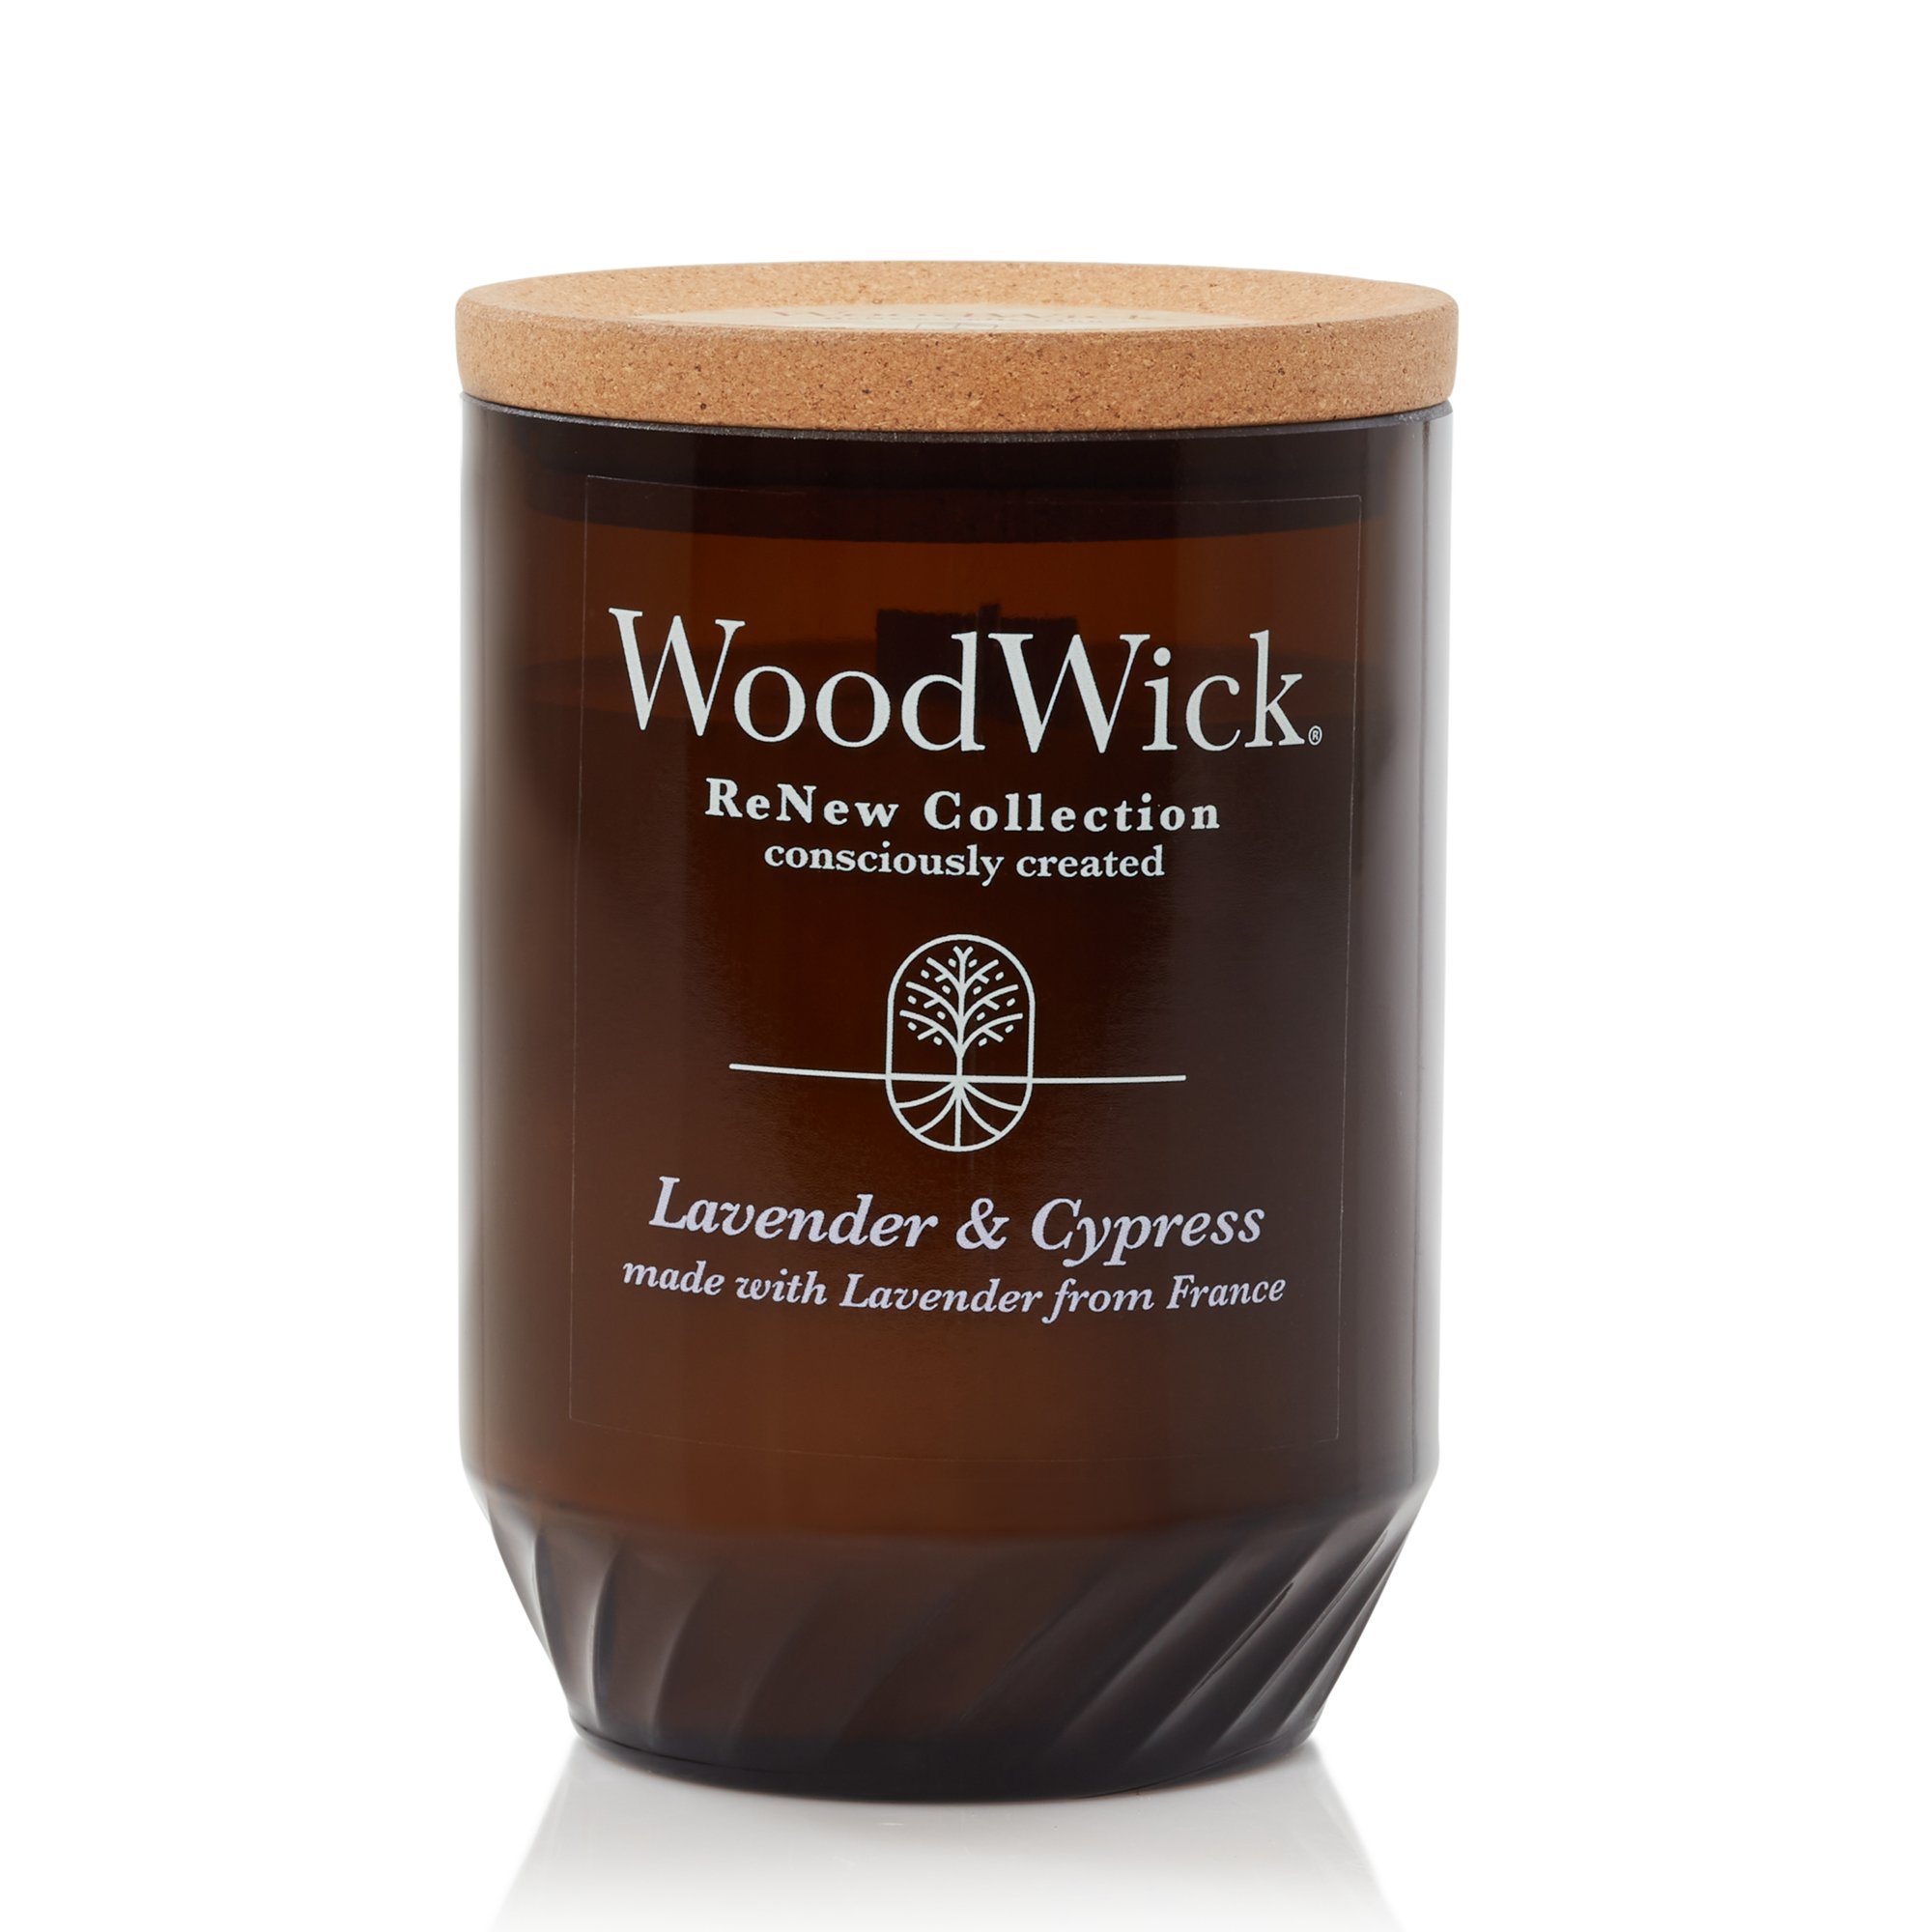 WoodWick Renew Large Candle, Lavender & Cypress, 13 oz.